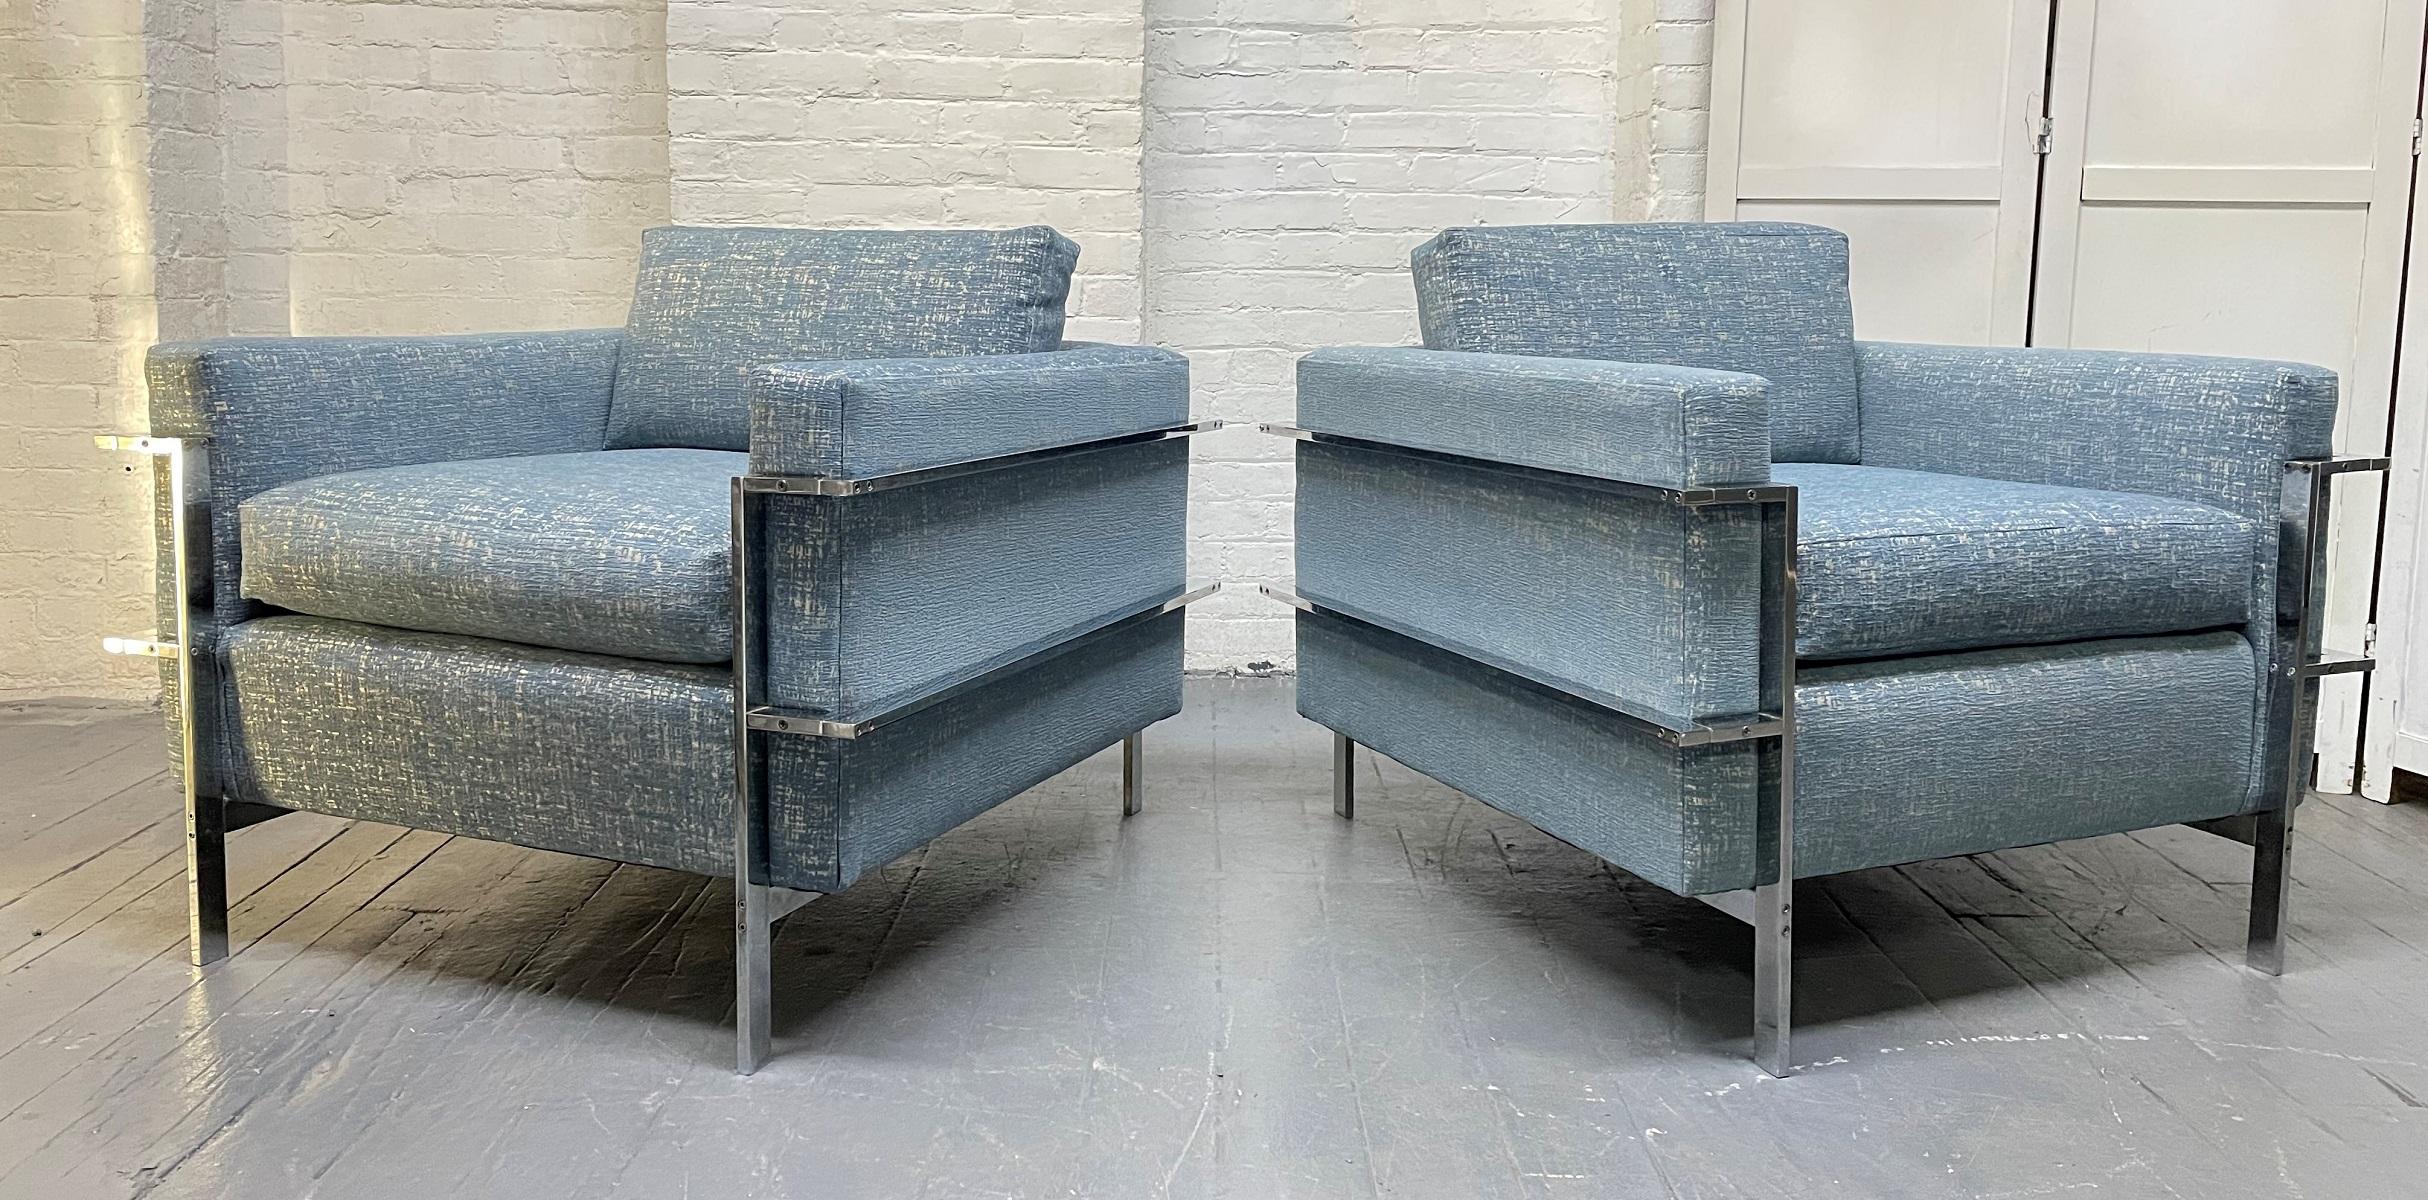 Pair of Mid Century Modern Flat Bar Chrome Upholstered Lounge Chairs.  The chairs have loose cushions, and the frames are steel and chrome.
Measures:  29H (to the top of back cushion) x 33D x 34W.  SH:  19